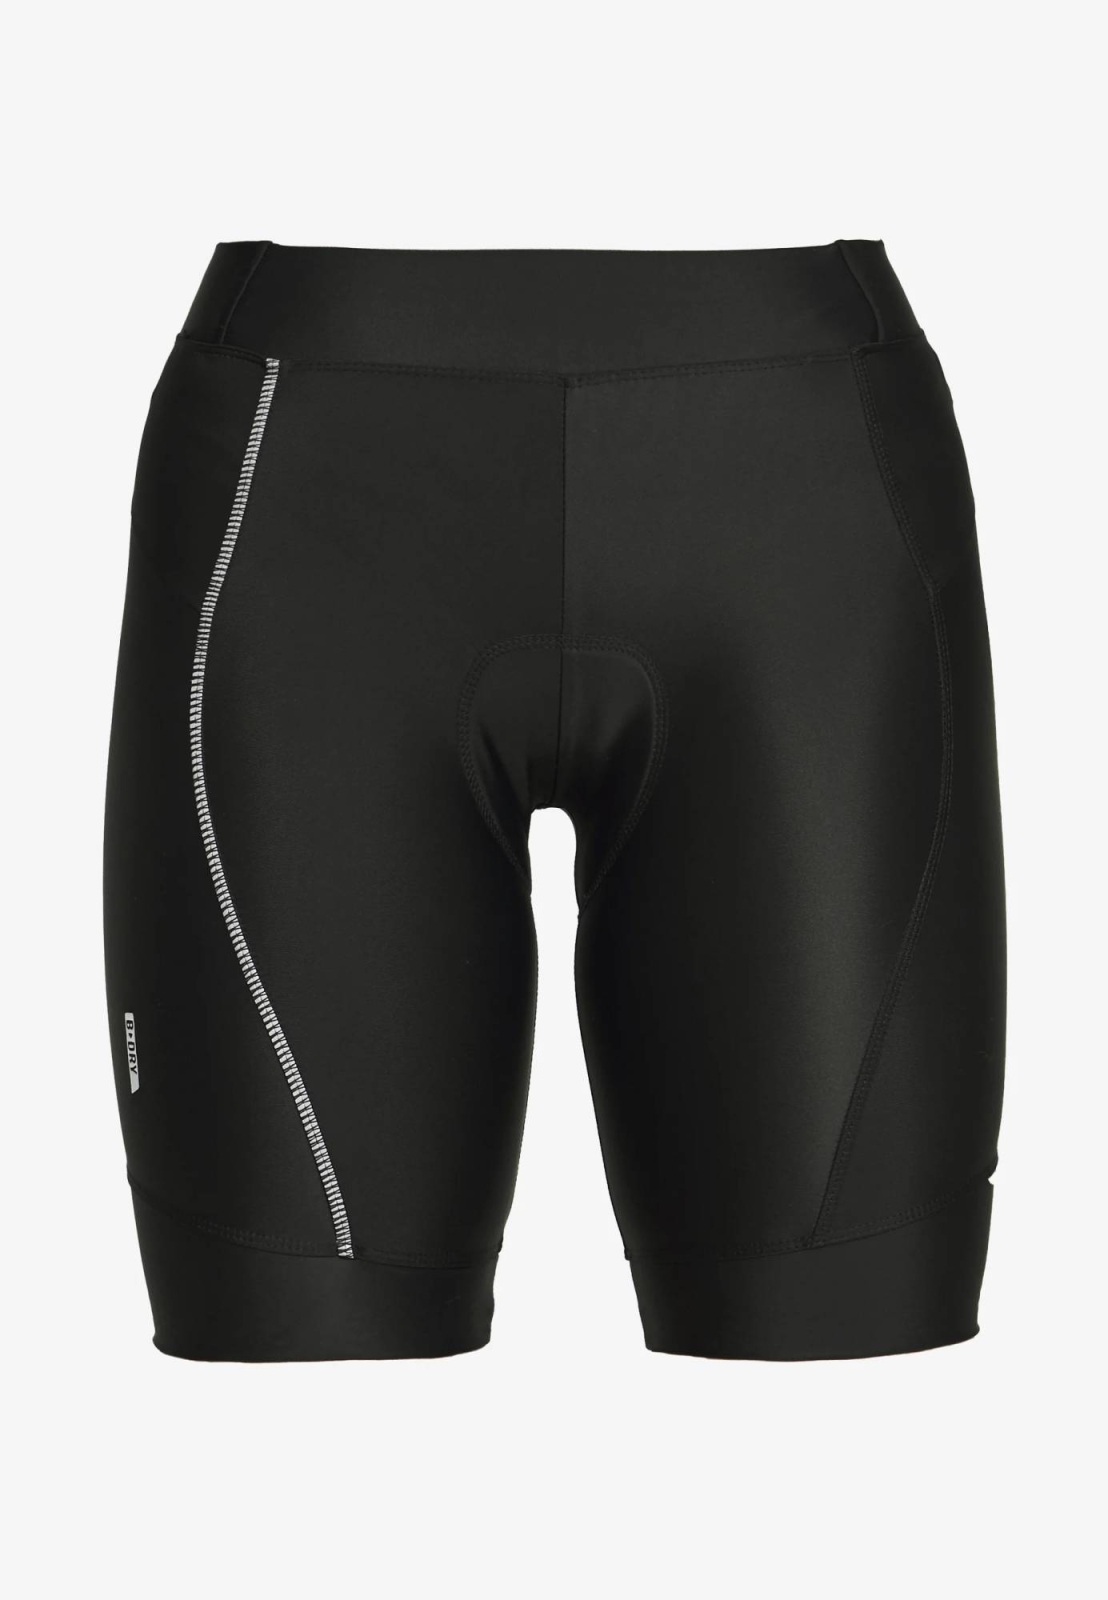 ONLY PLAY PERFORMANCE BIKE SHORT